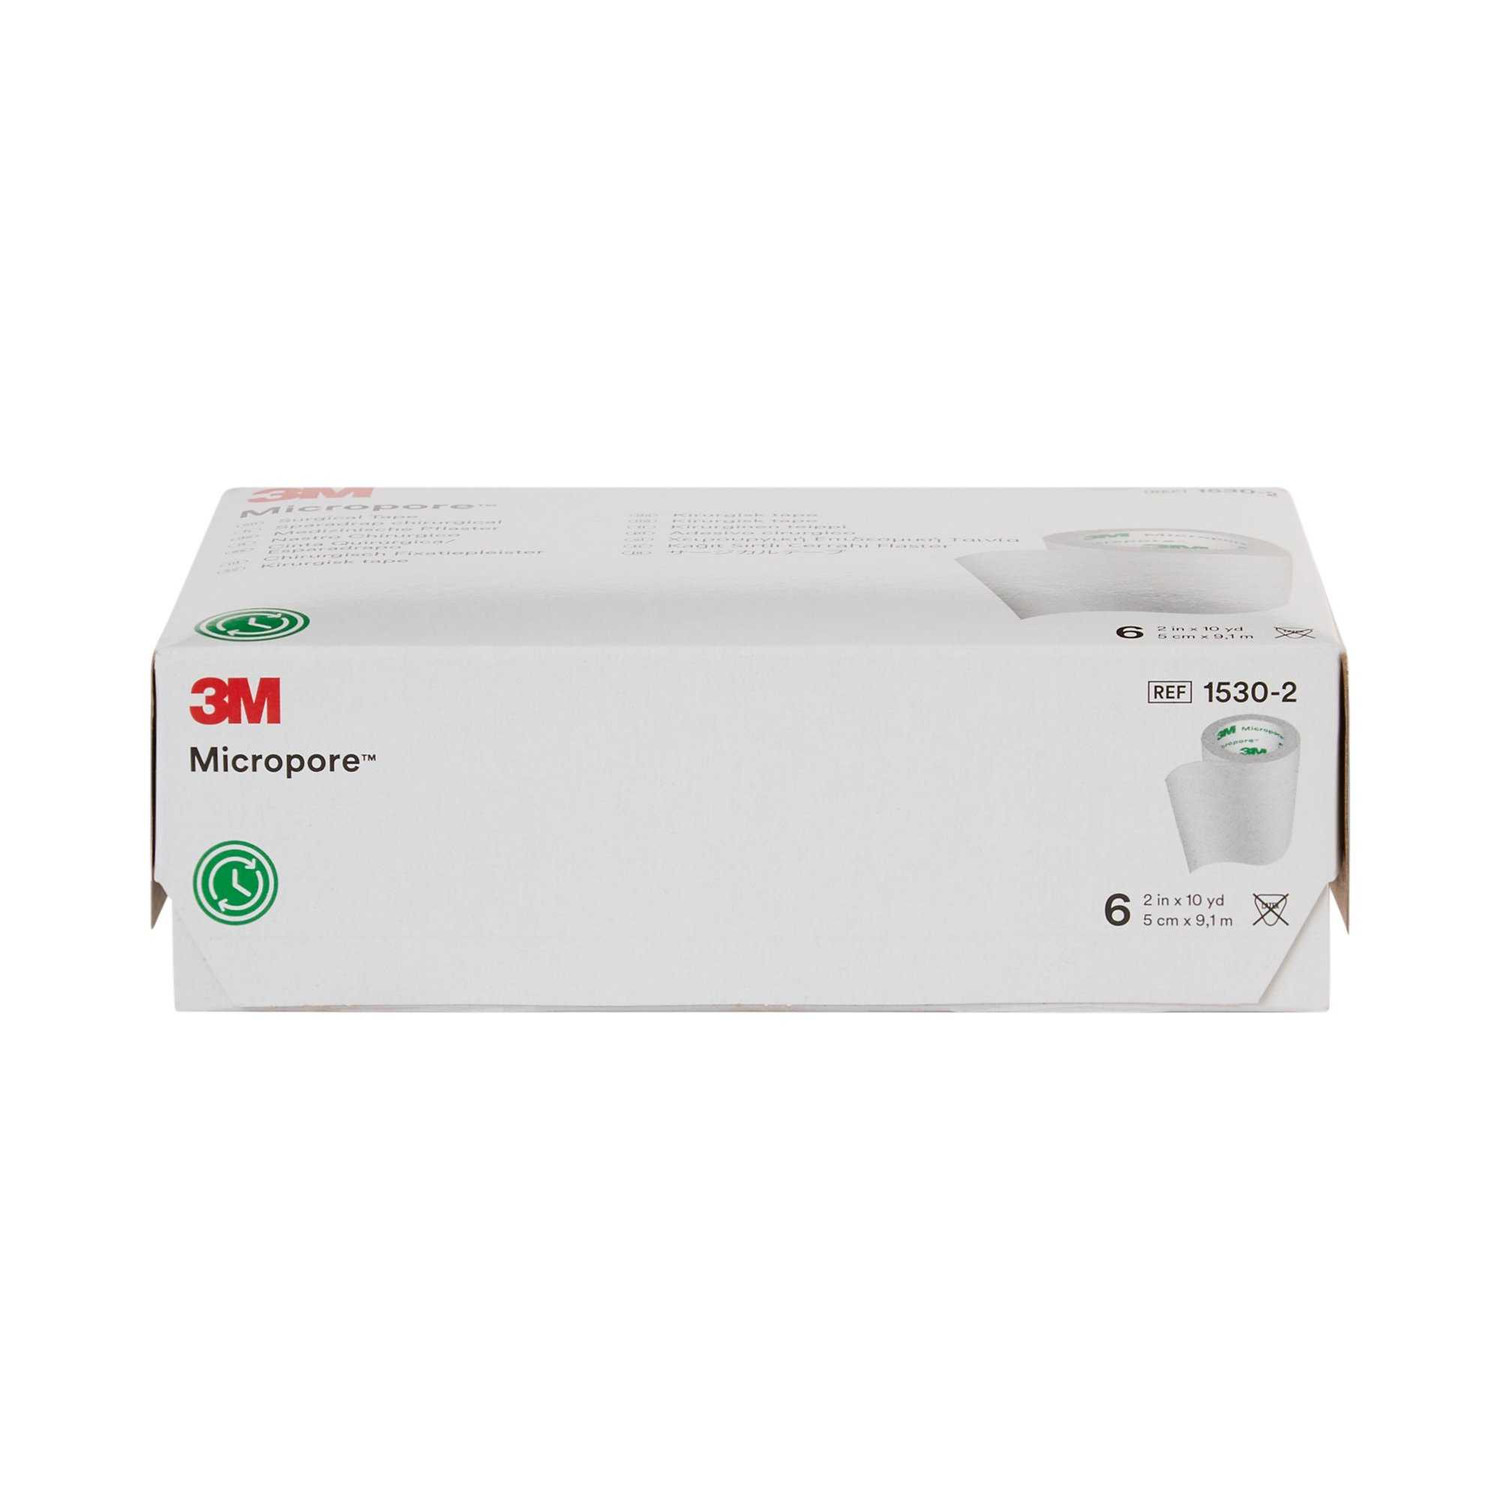 3M 1530-1 Micropore Surgical Tape 1inch x 10 yd. - Box of 10